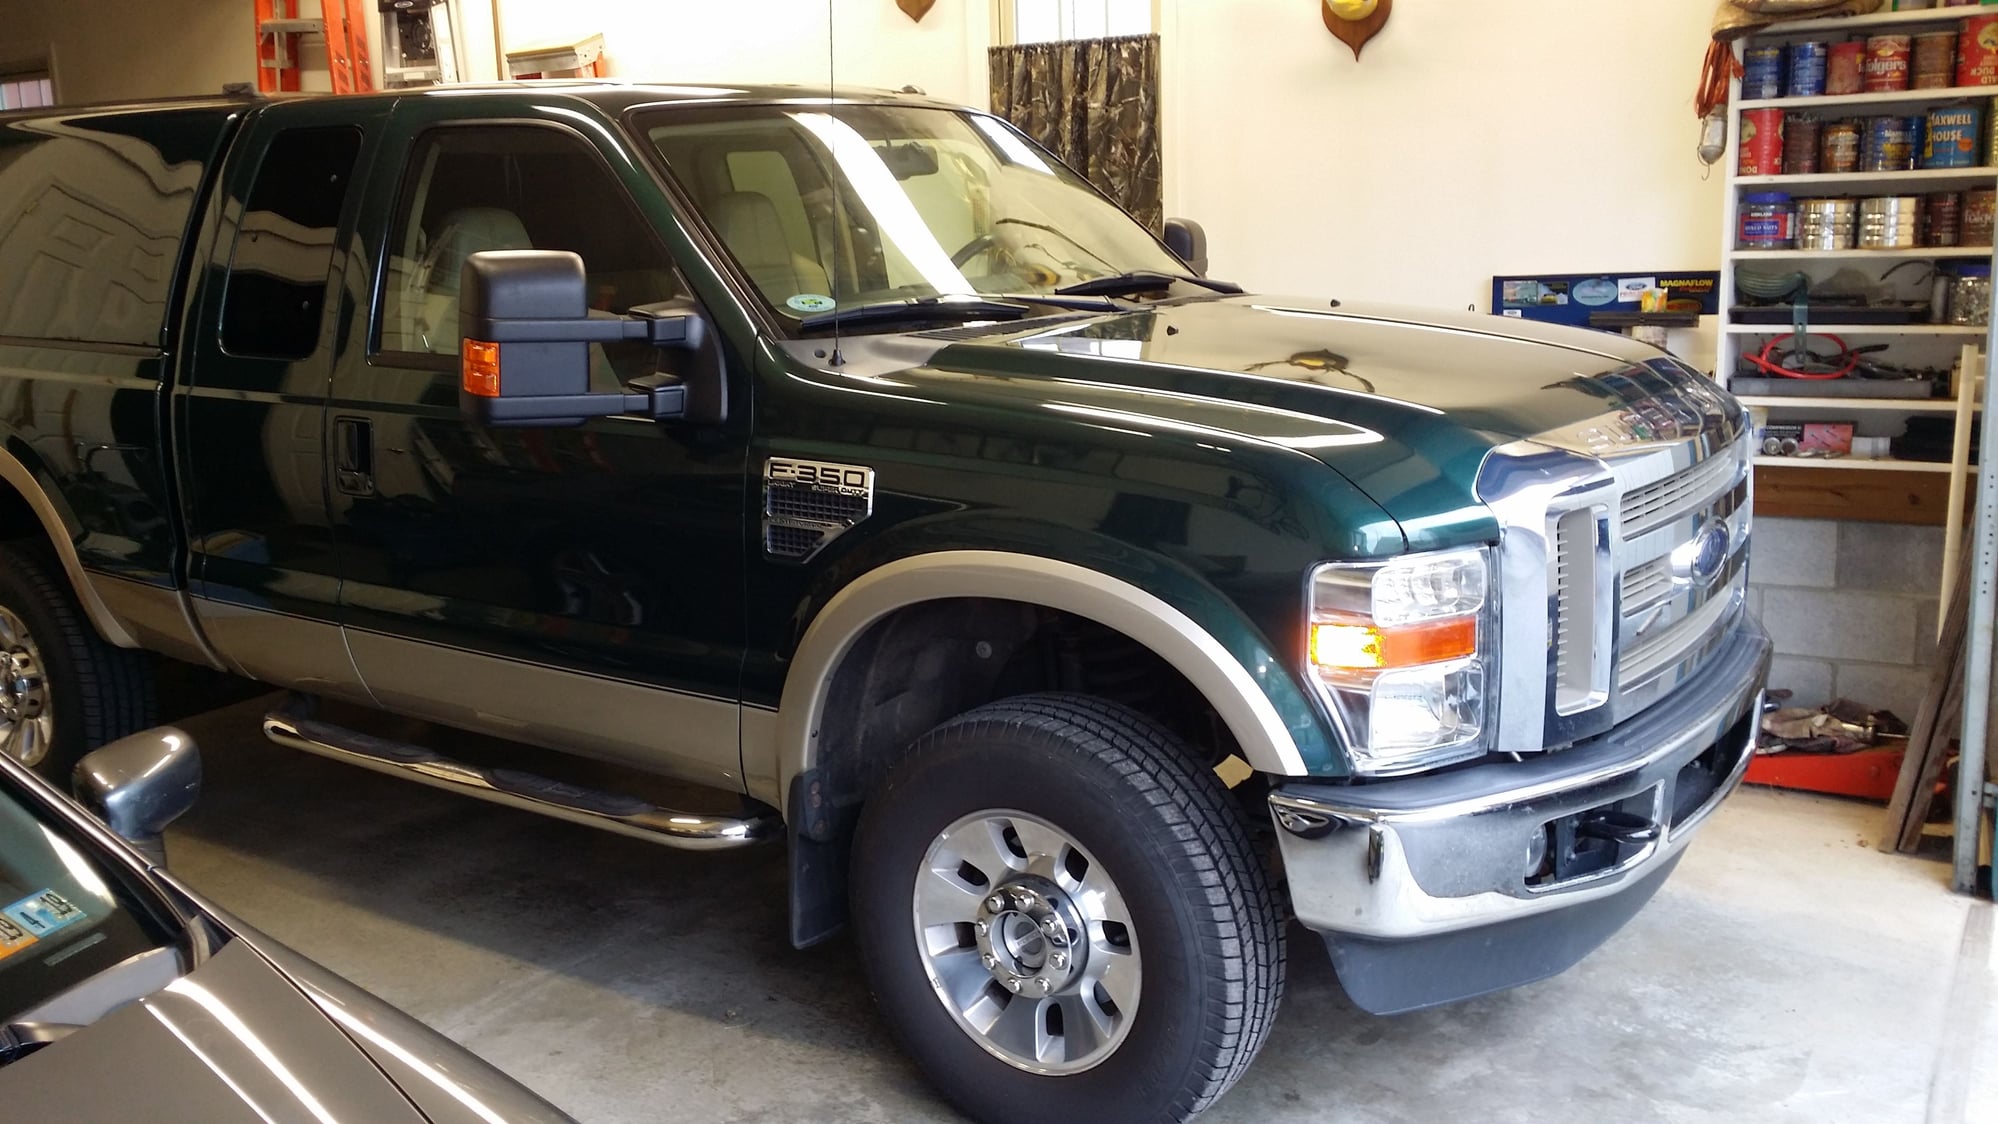 2010 Ford F-350 Super Duty - One owner, garage kept, well maintained F-350 SRW  V-10 - Used - VIN 1FTWX3BY5AEB00674 - 101,013 Miles - 10 cyl - 4WD - Automatic - Truck - Other - Lititz, PA 17543, United States